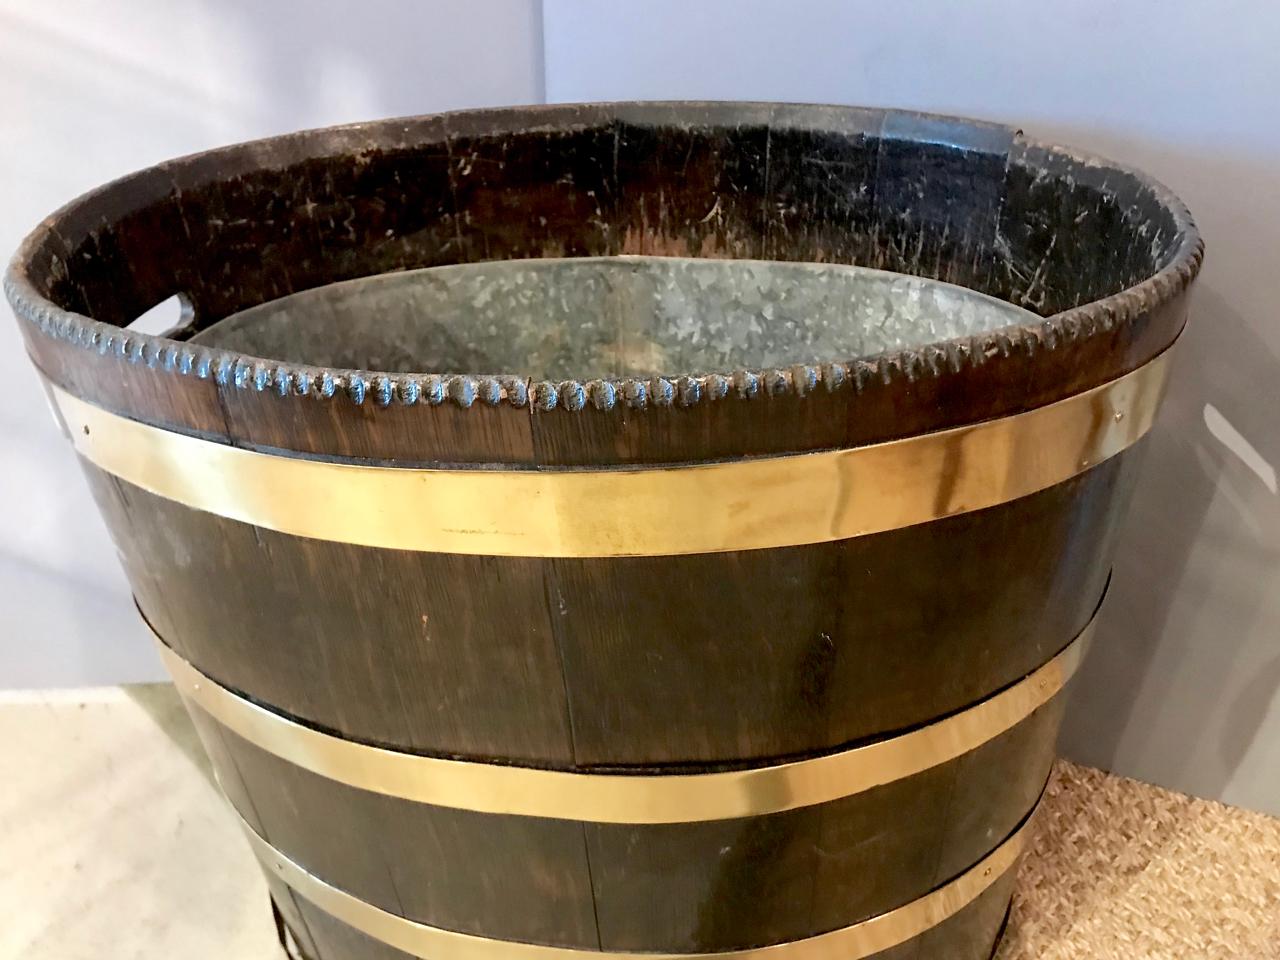 English Peat Bucket For Sale